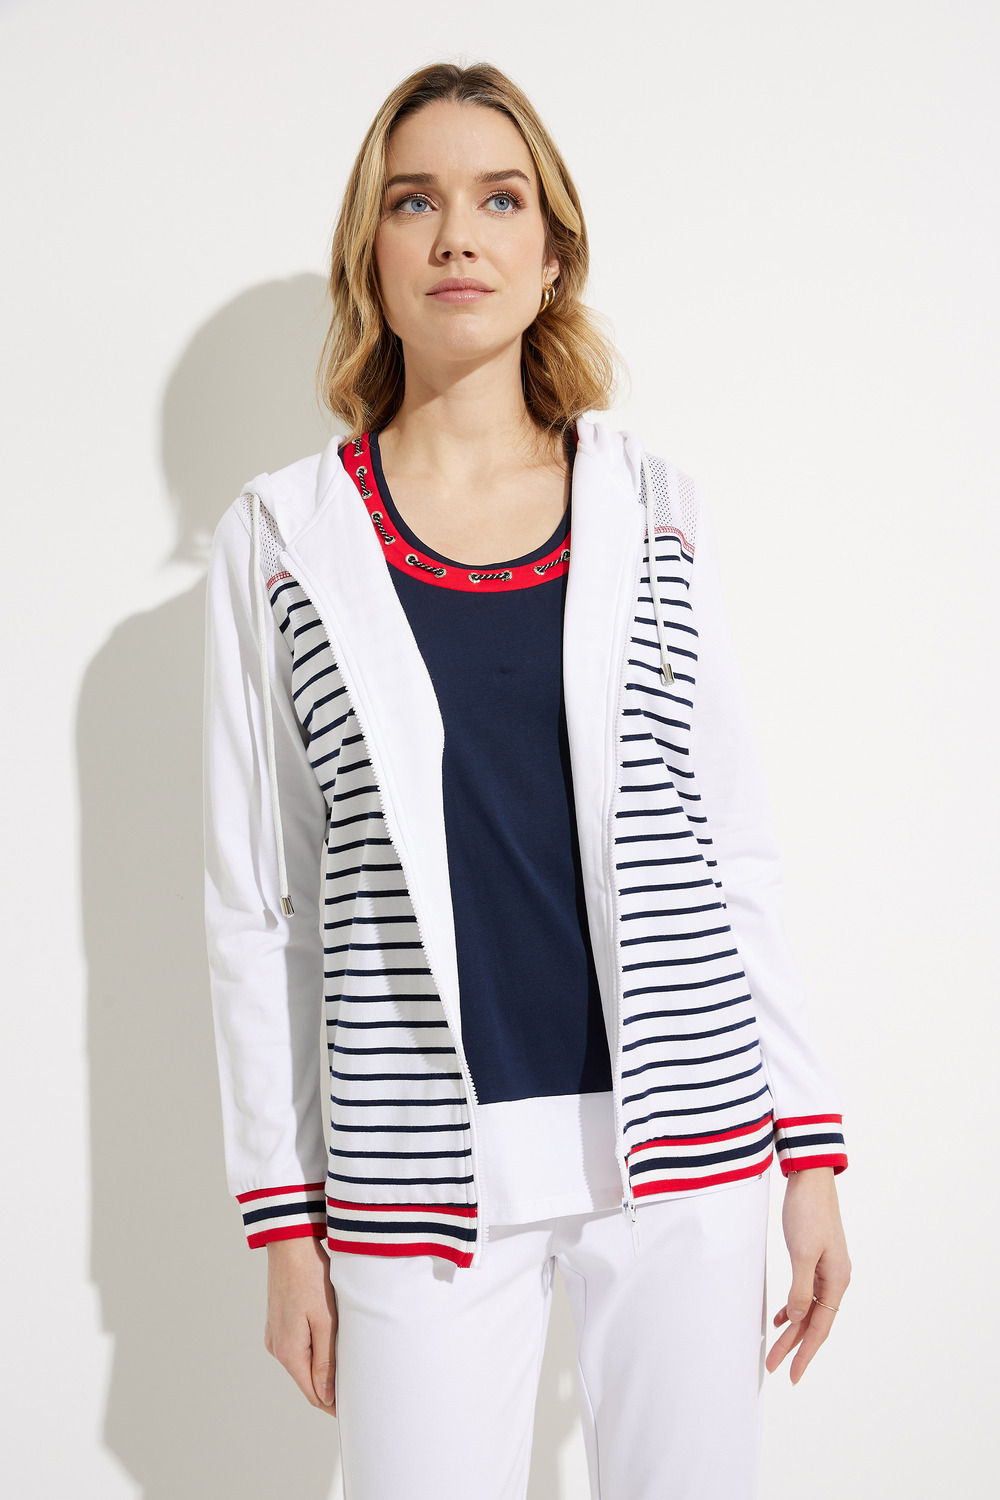 Embroidered Striped Hooded Sweater Style 605-11. As Sample